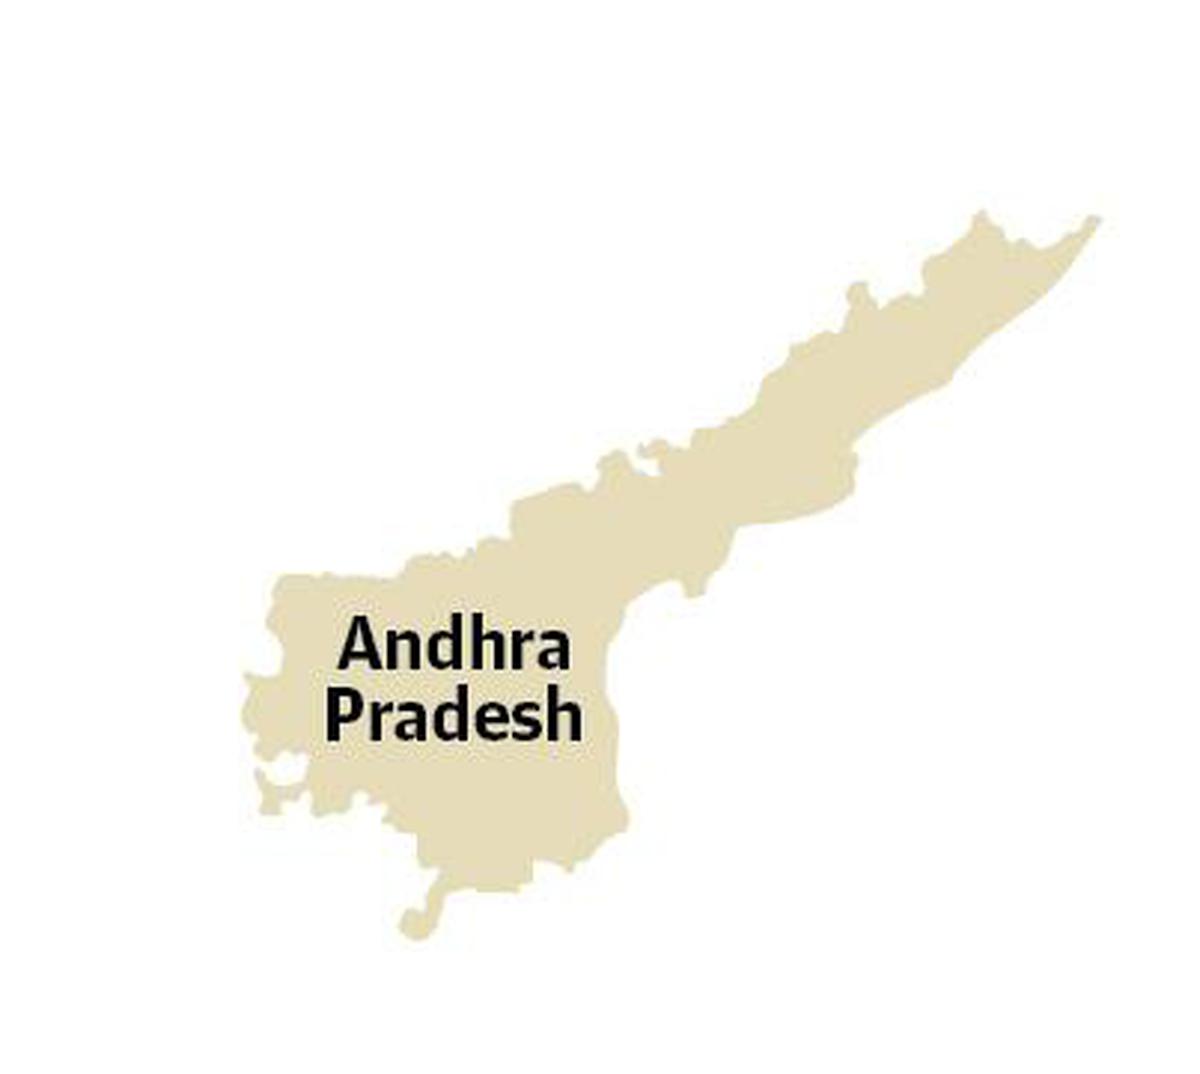 New districts, new challenges in Andhra Pradesh